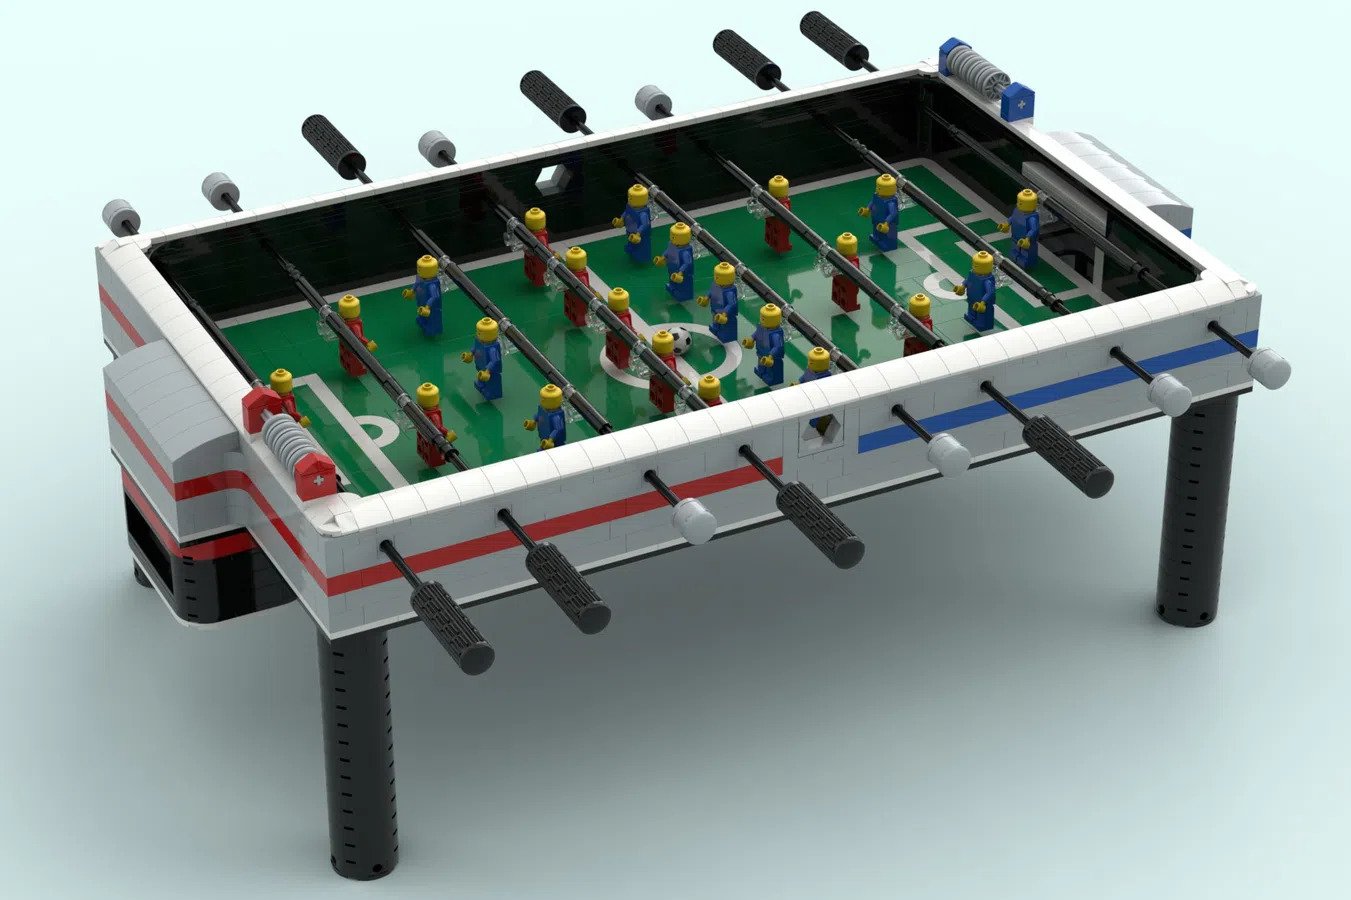 Hungarian Teenager Wins LEGO Competition With Foosball Table